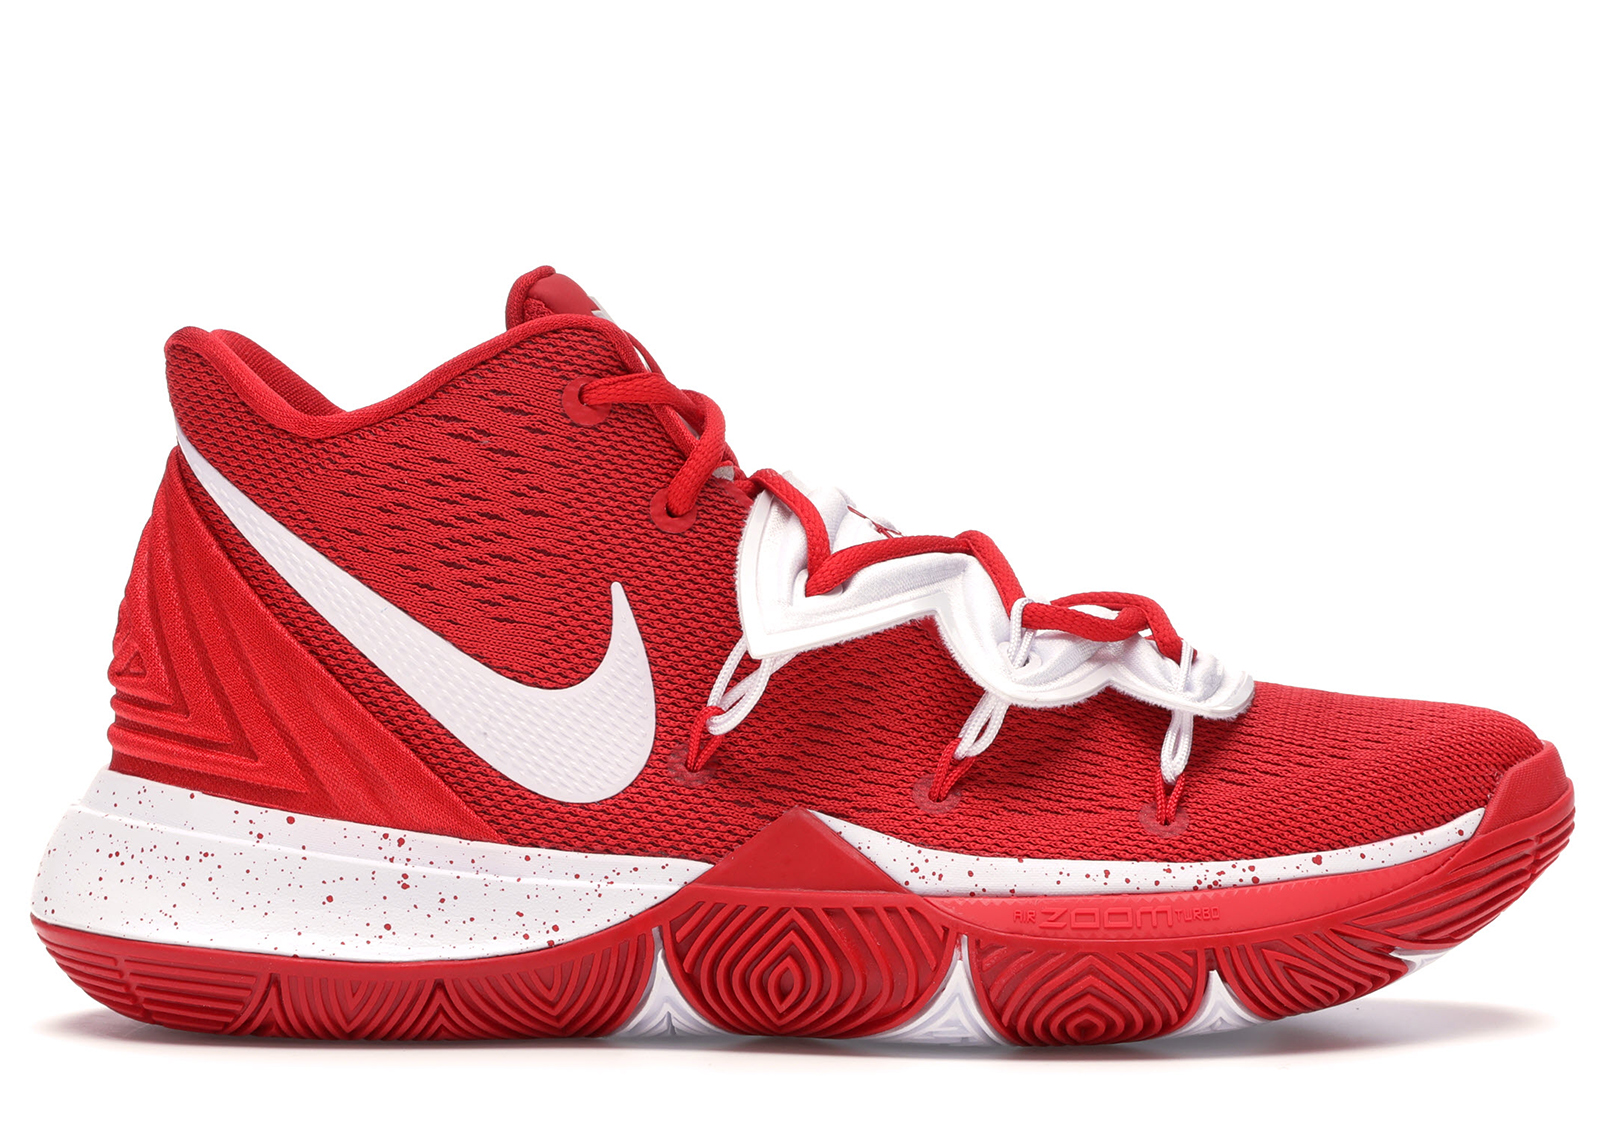 kyrie 5 shoes red